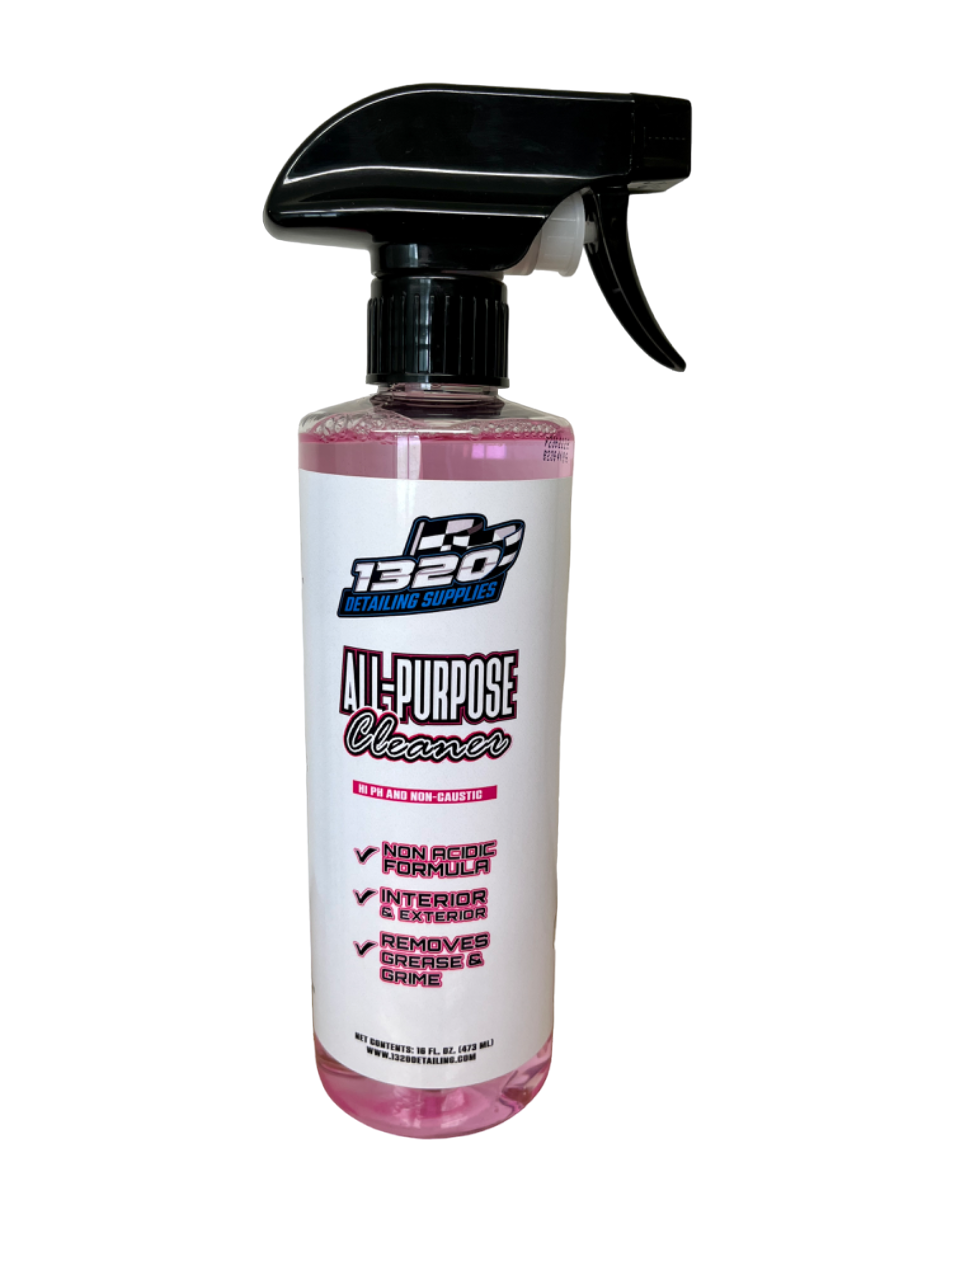 All Purpose Cleaner | Car Cleaner Spray | 1320 Detailing Supplies